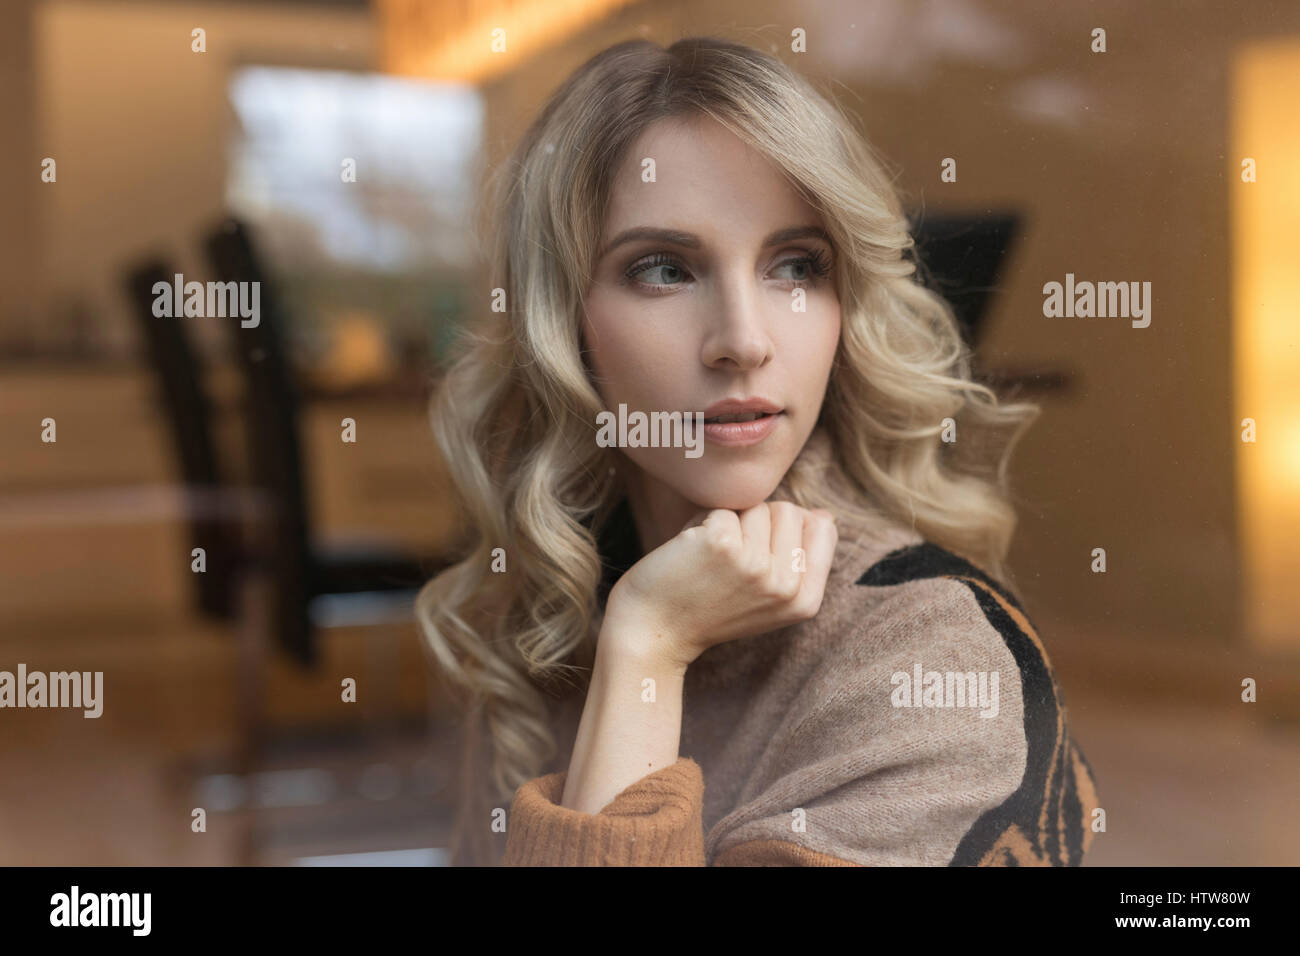 Portrait of a blond woman in the dining room Stock Photo